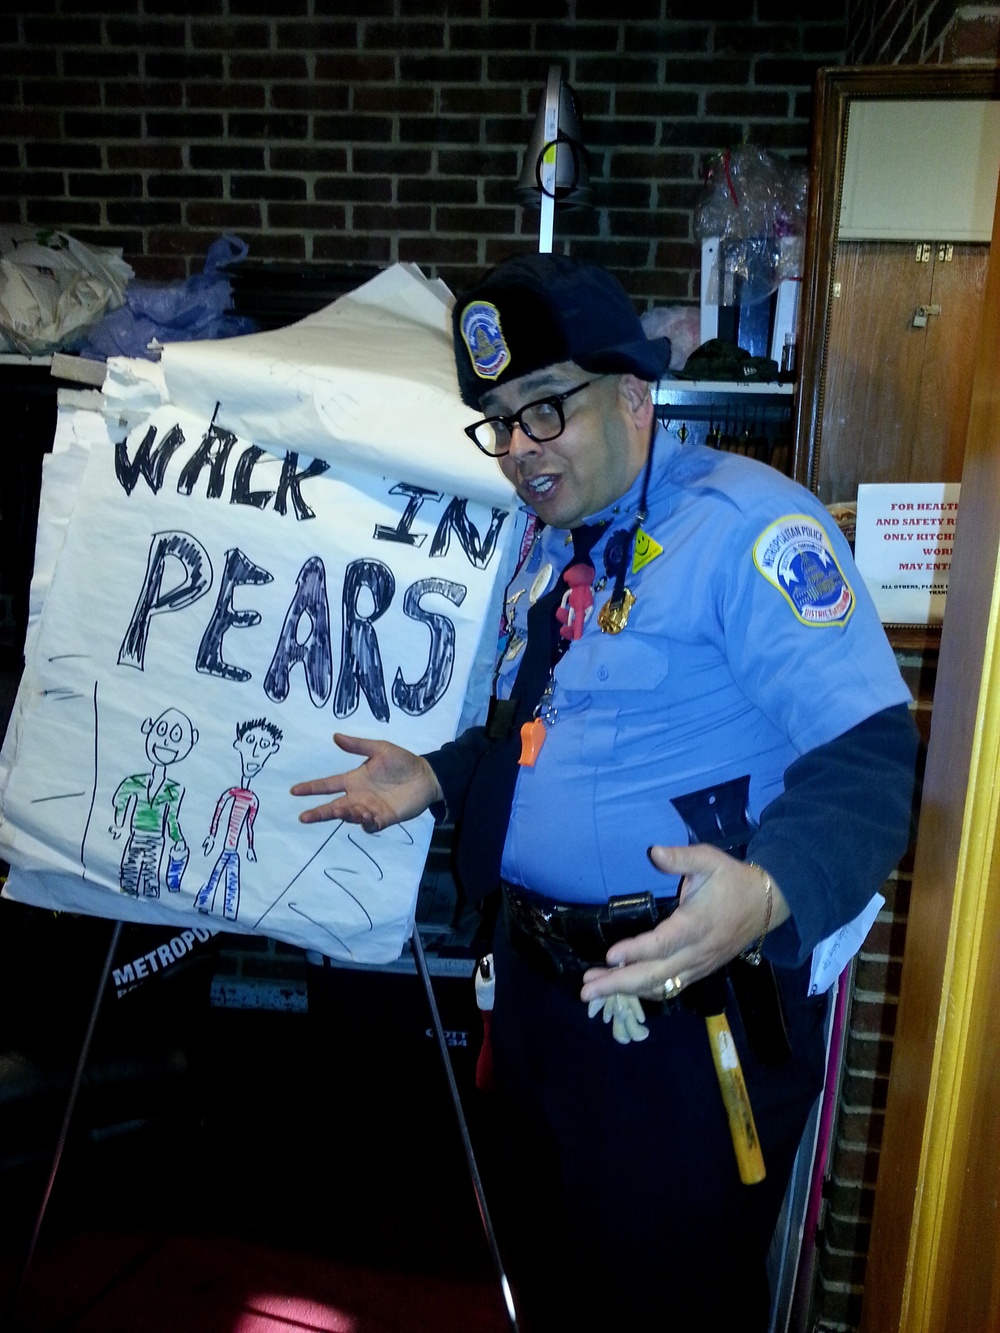 Metropolitan Police Department (MPD) safety outreach officer teaches holiday safety tips; encourages youth to walk in pears [sic]